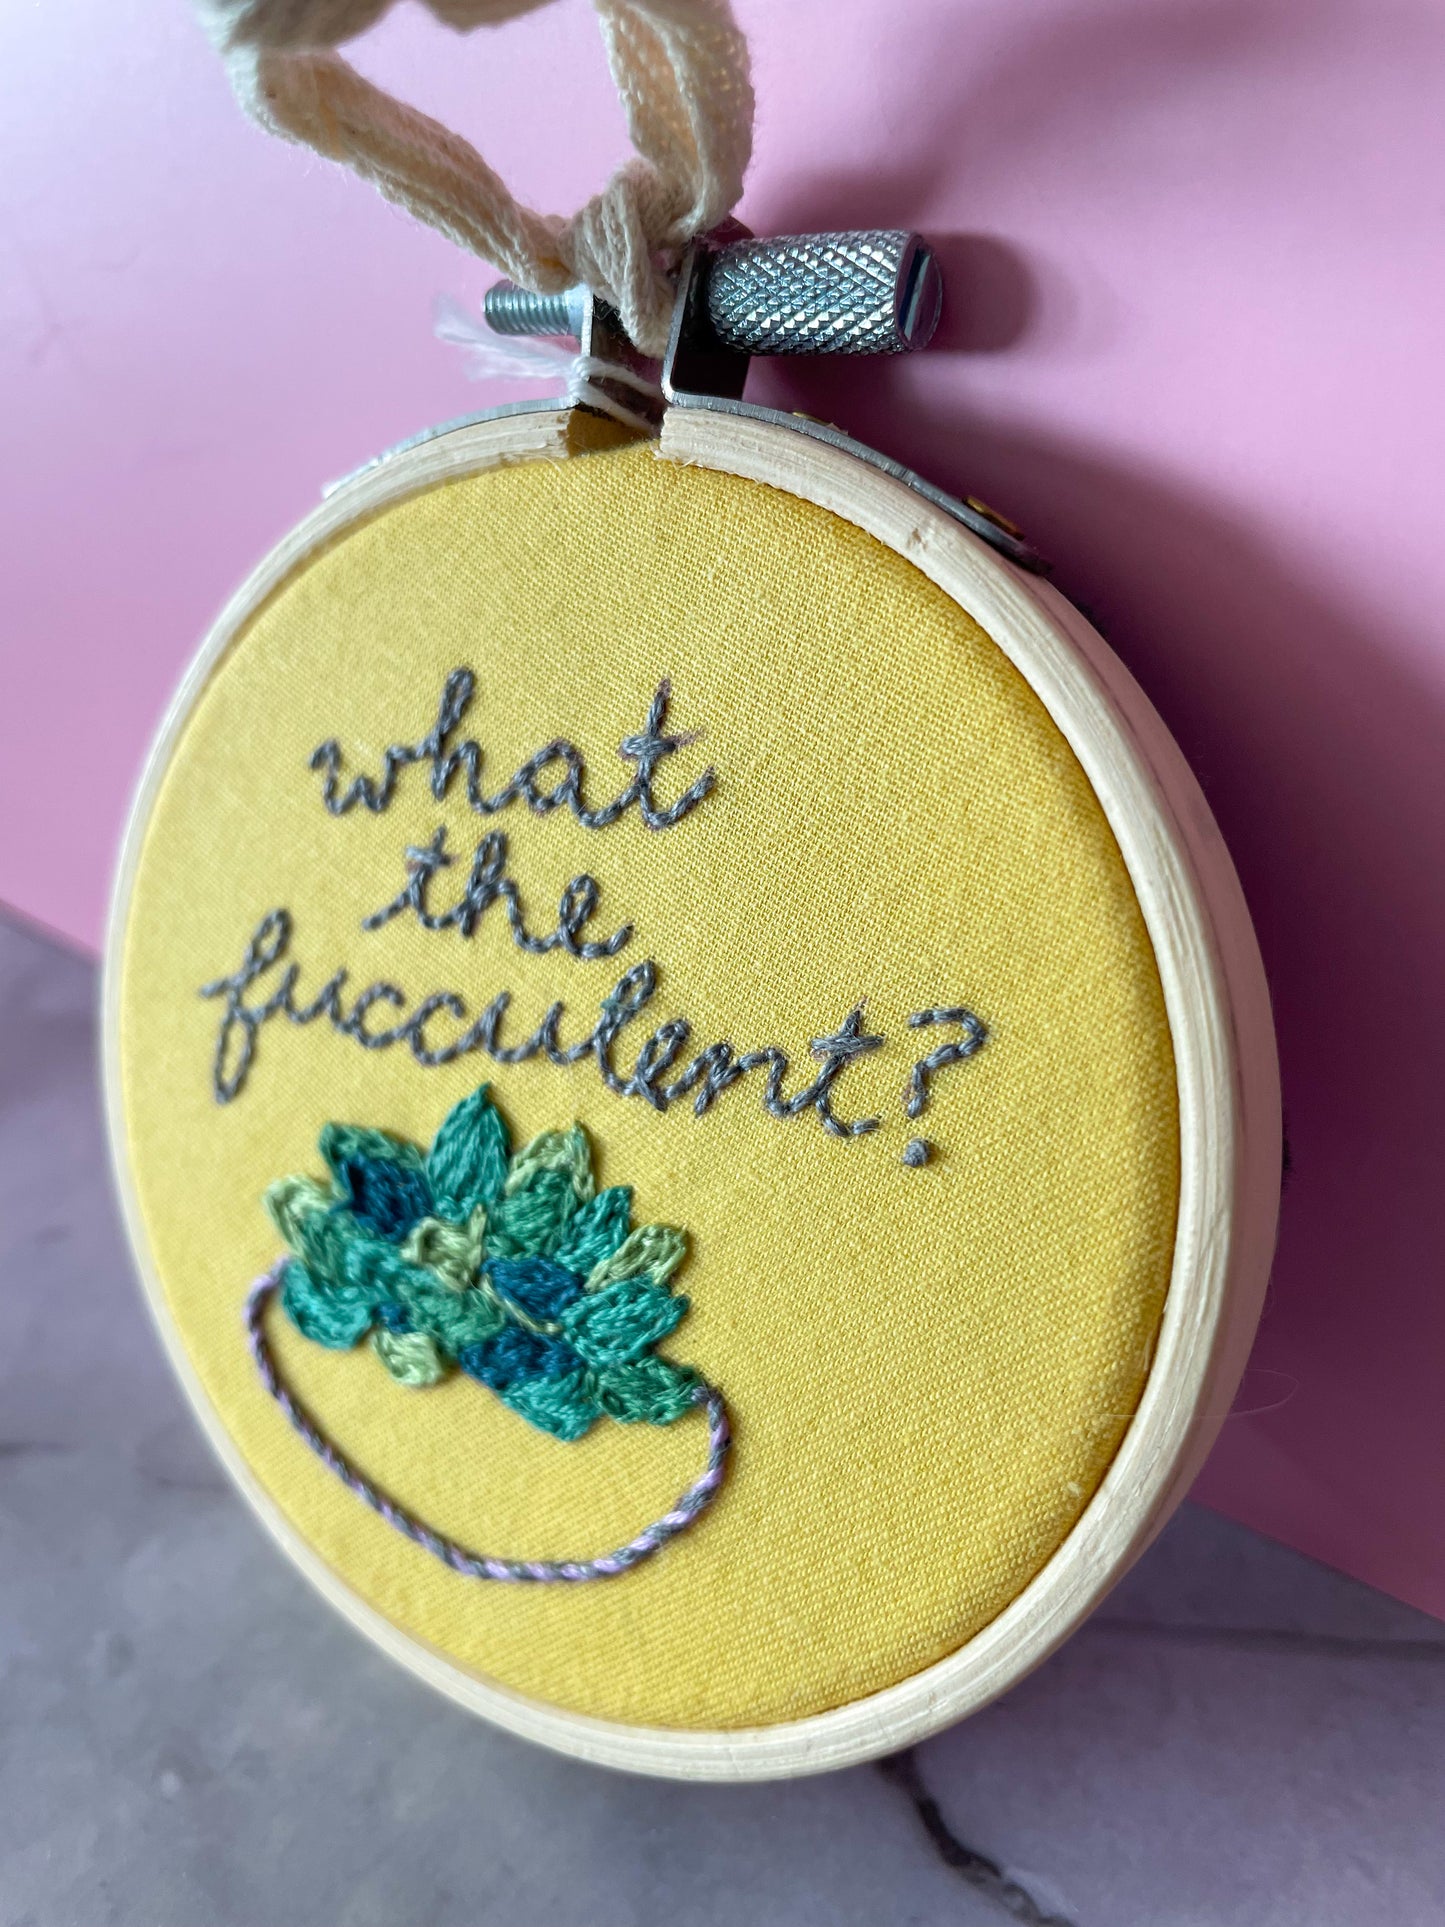 "What the Fucculent" 4" Embroidery